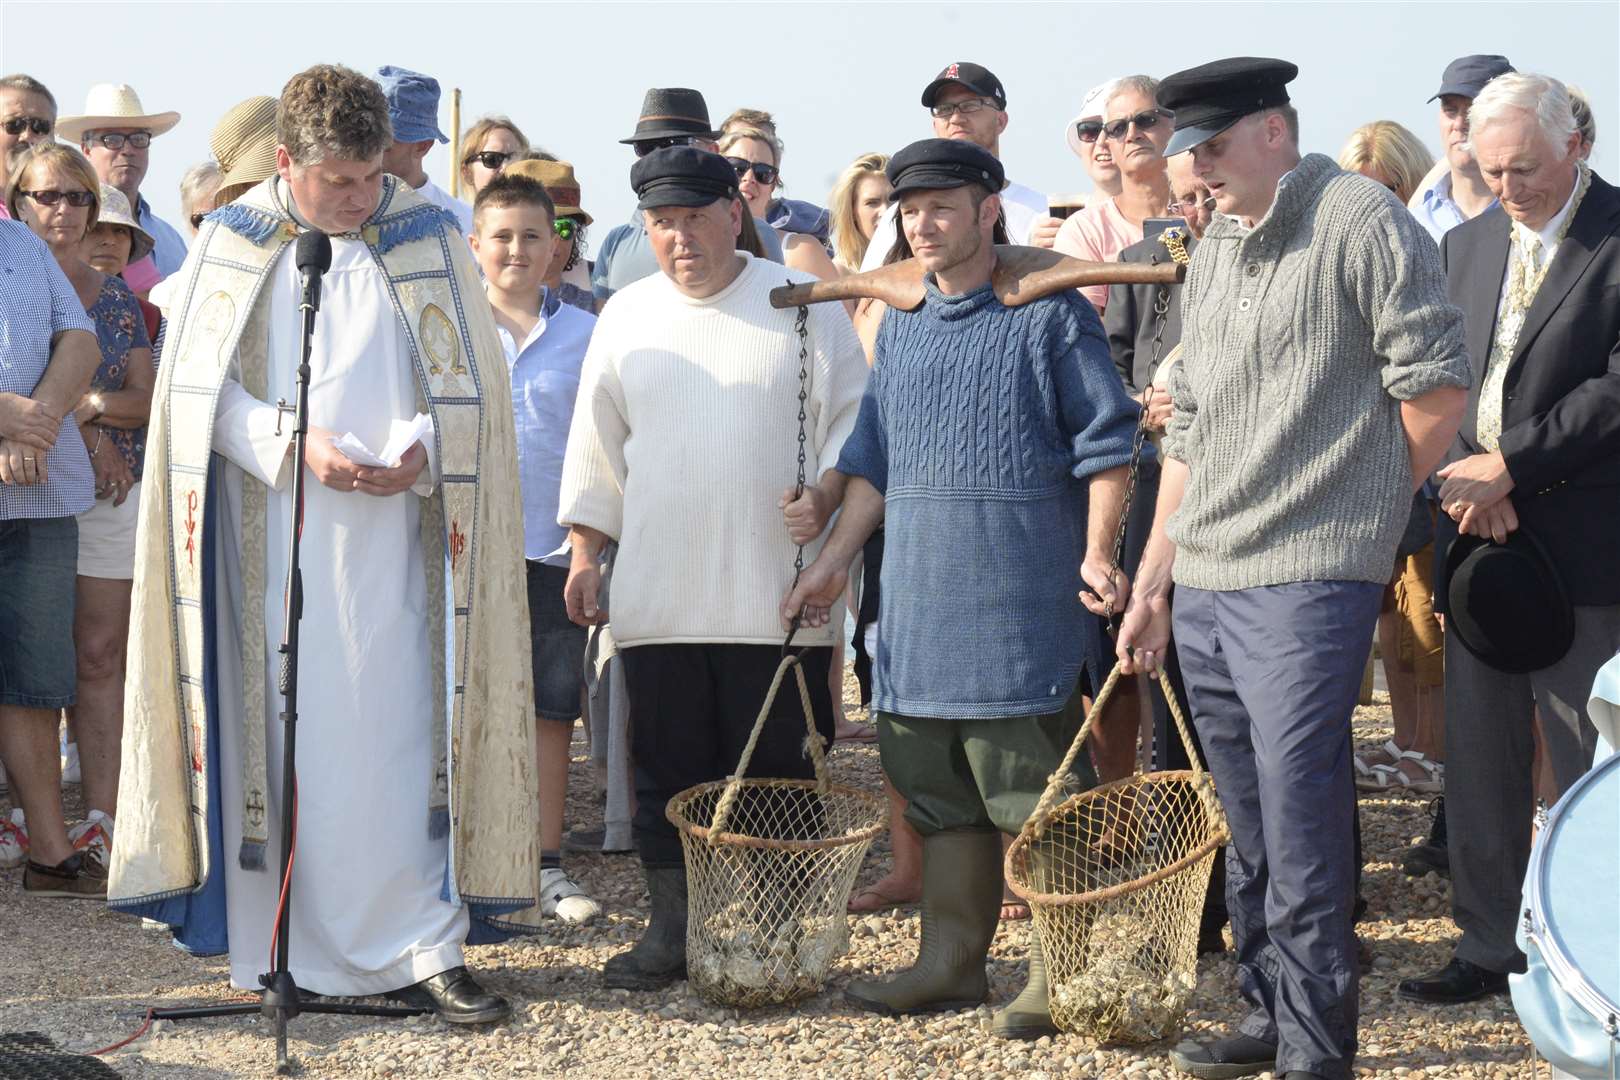 The Landing of the Oysters at the Whitstable Oyster Festival